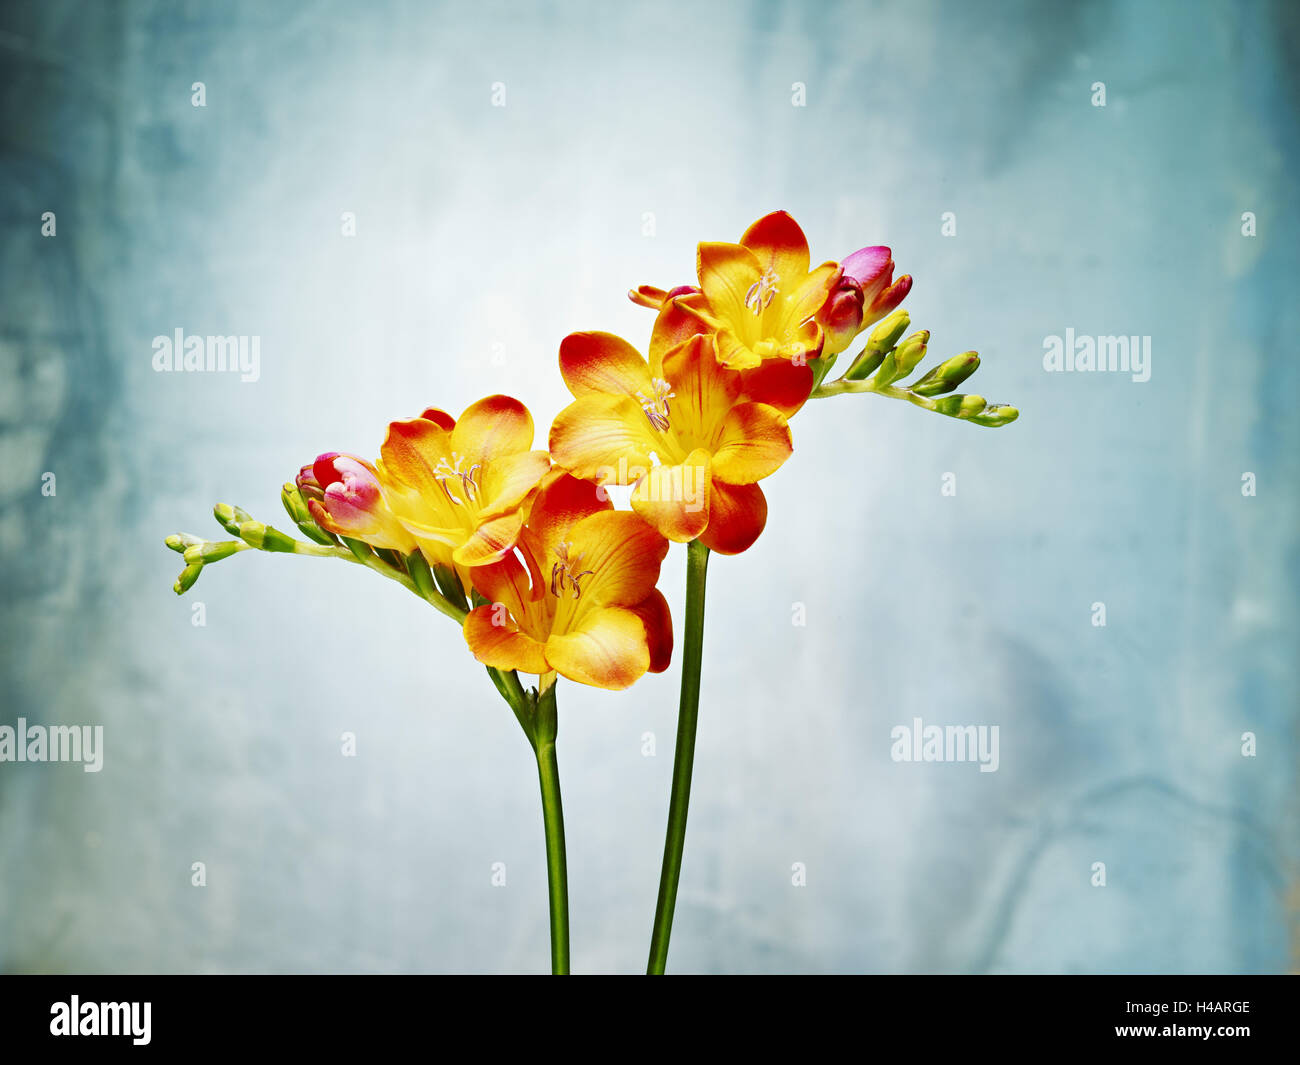 Freesia, flower, blossoms, buds, still life, red, yellow, blue, Stock Photo